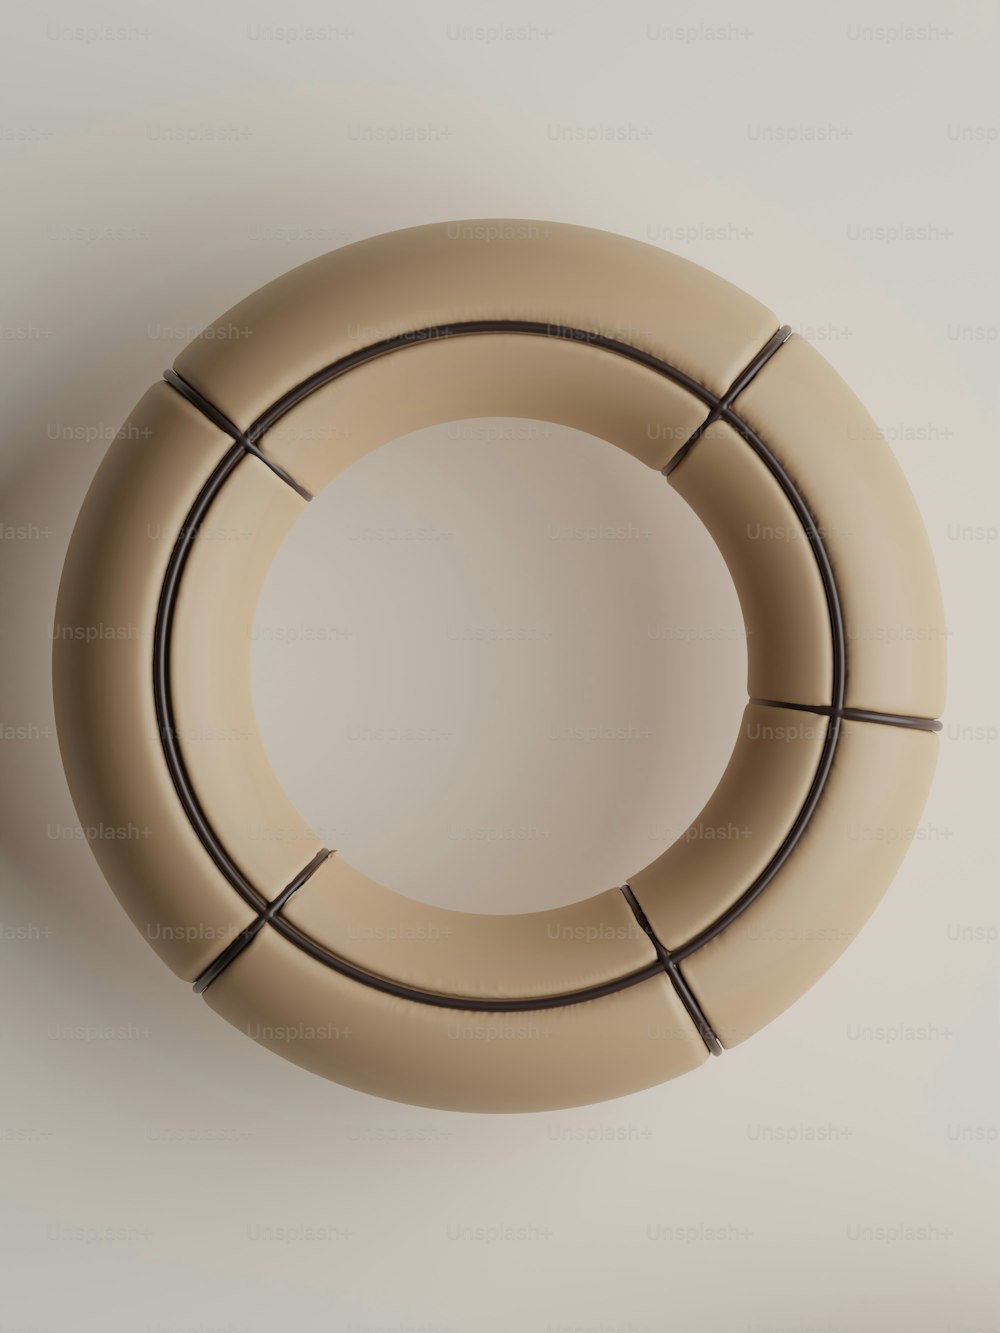 a circular object is shown on a white surface